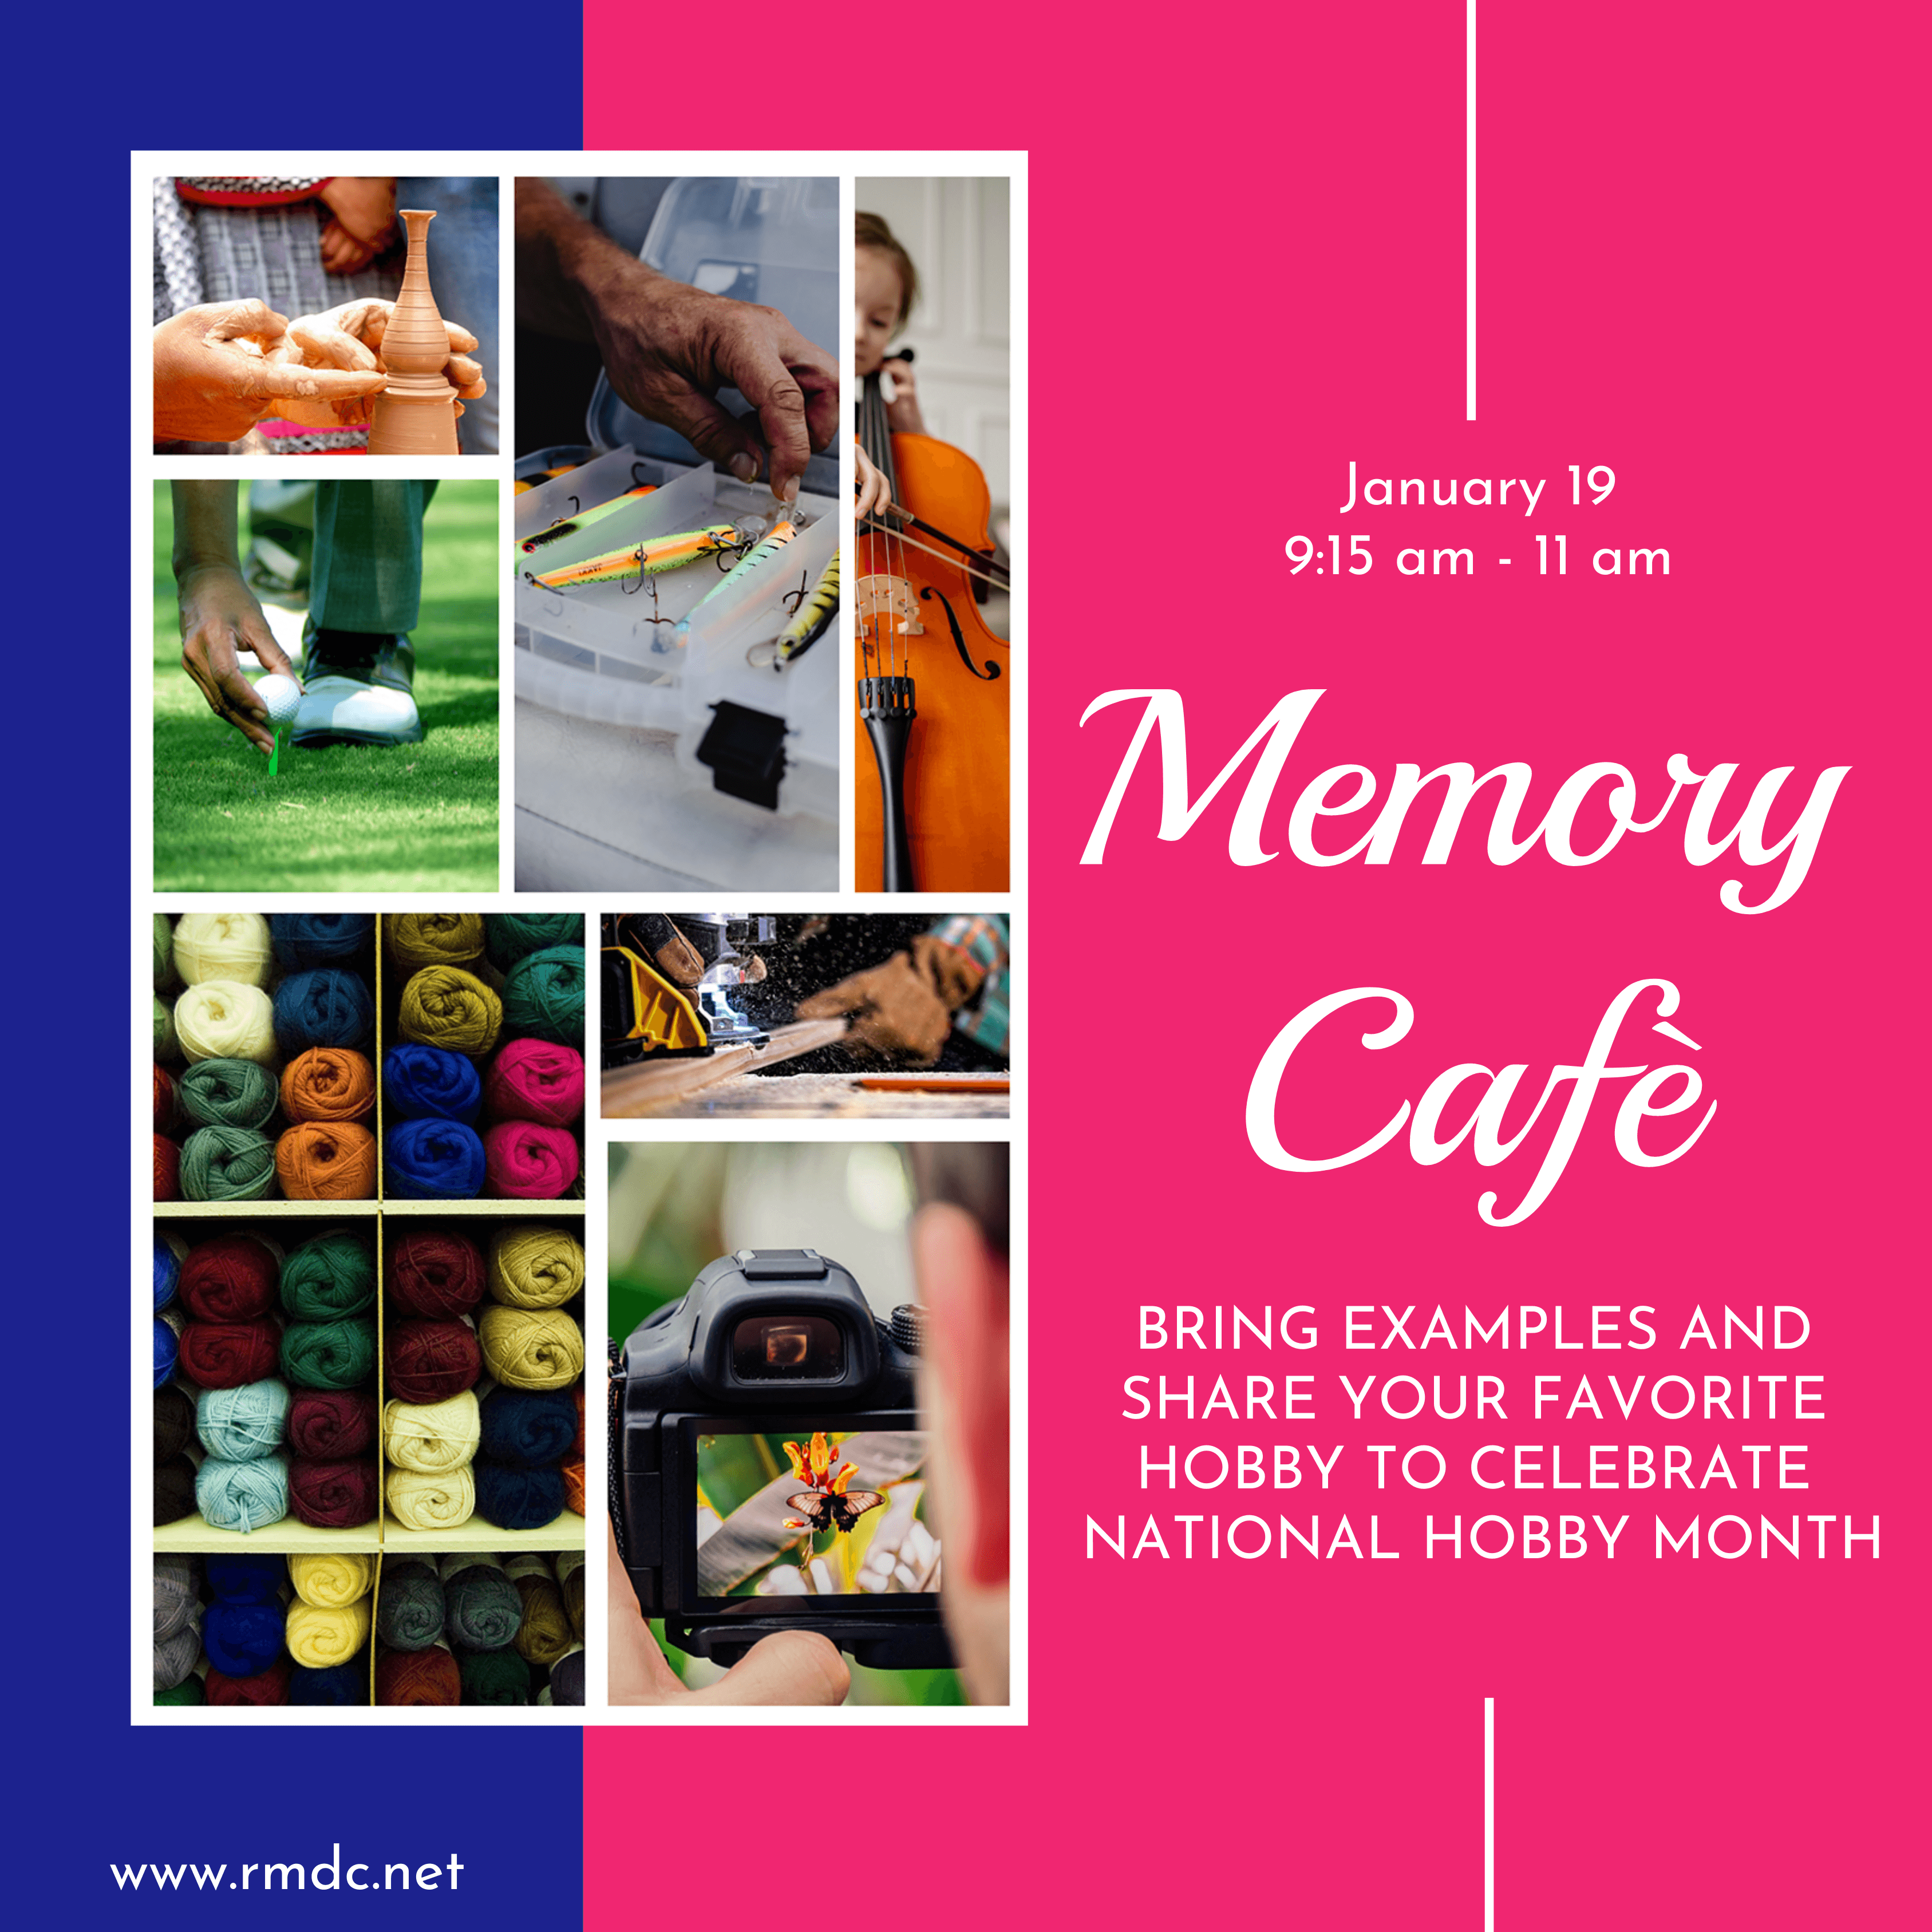 Memory Cafe will celebrate the talents and hobbies of its participants in celebration of National Hobby Month!